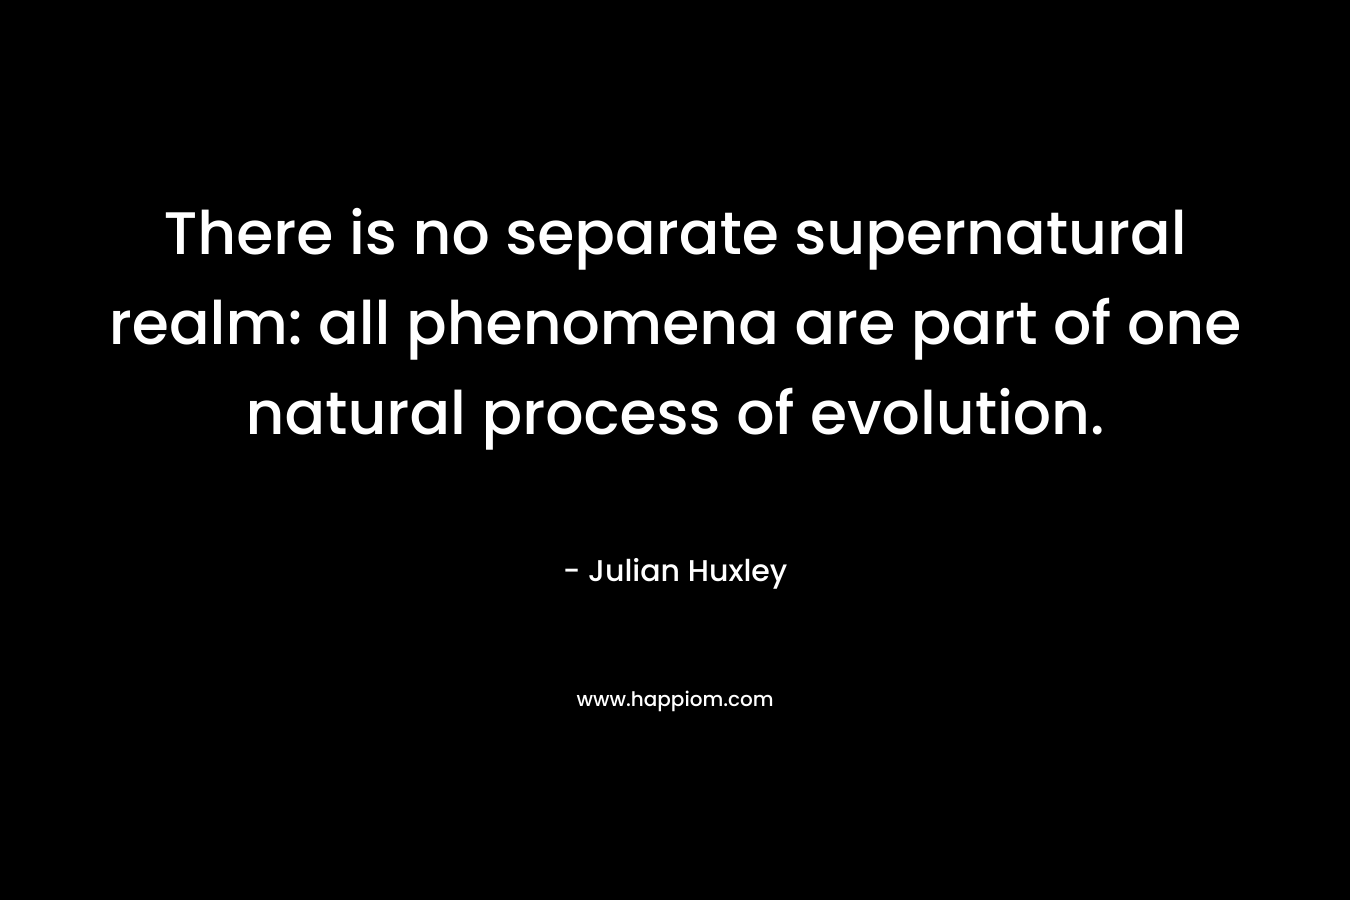 There is no separate supernatural realm: all phenomena are part of one natural process of evolution. – Julian Huxley